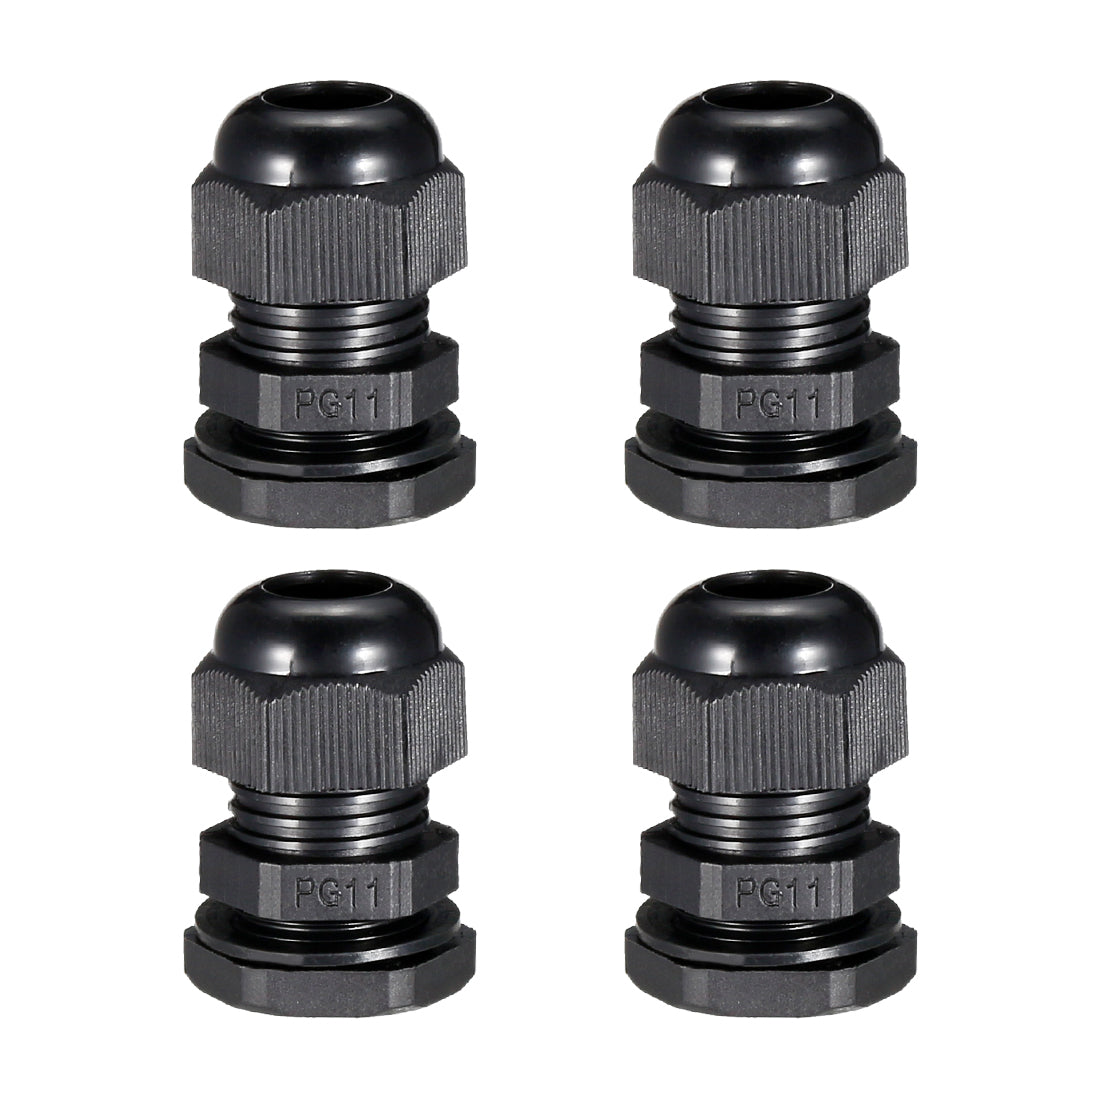 uxcell Uxcell 4Pcs PG11 Cable Gland Waterproof Plastic Joint Adjustable Locknut Black for 5mm-10mm Dia Cable Wire